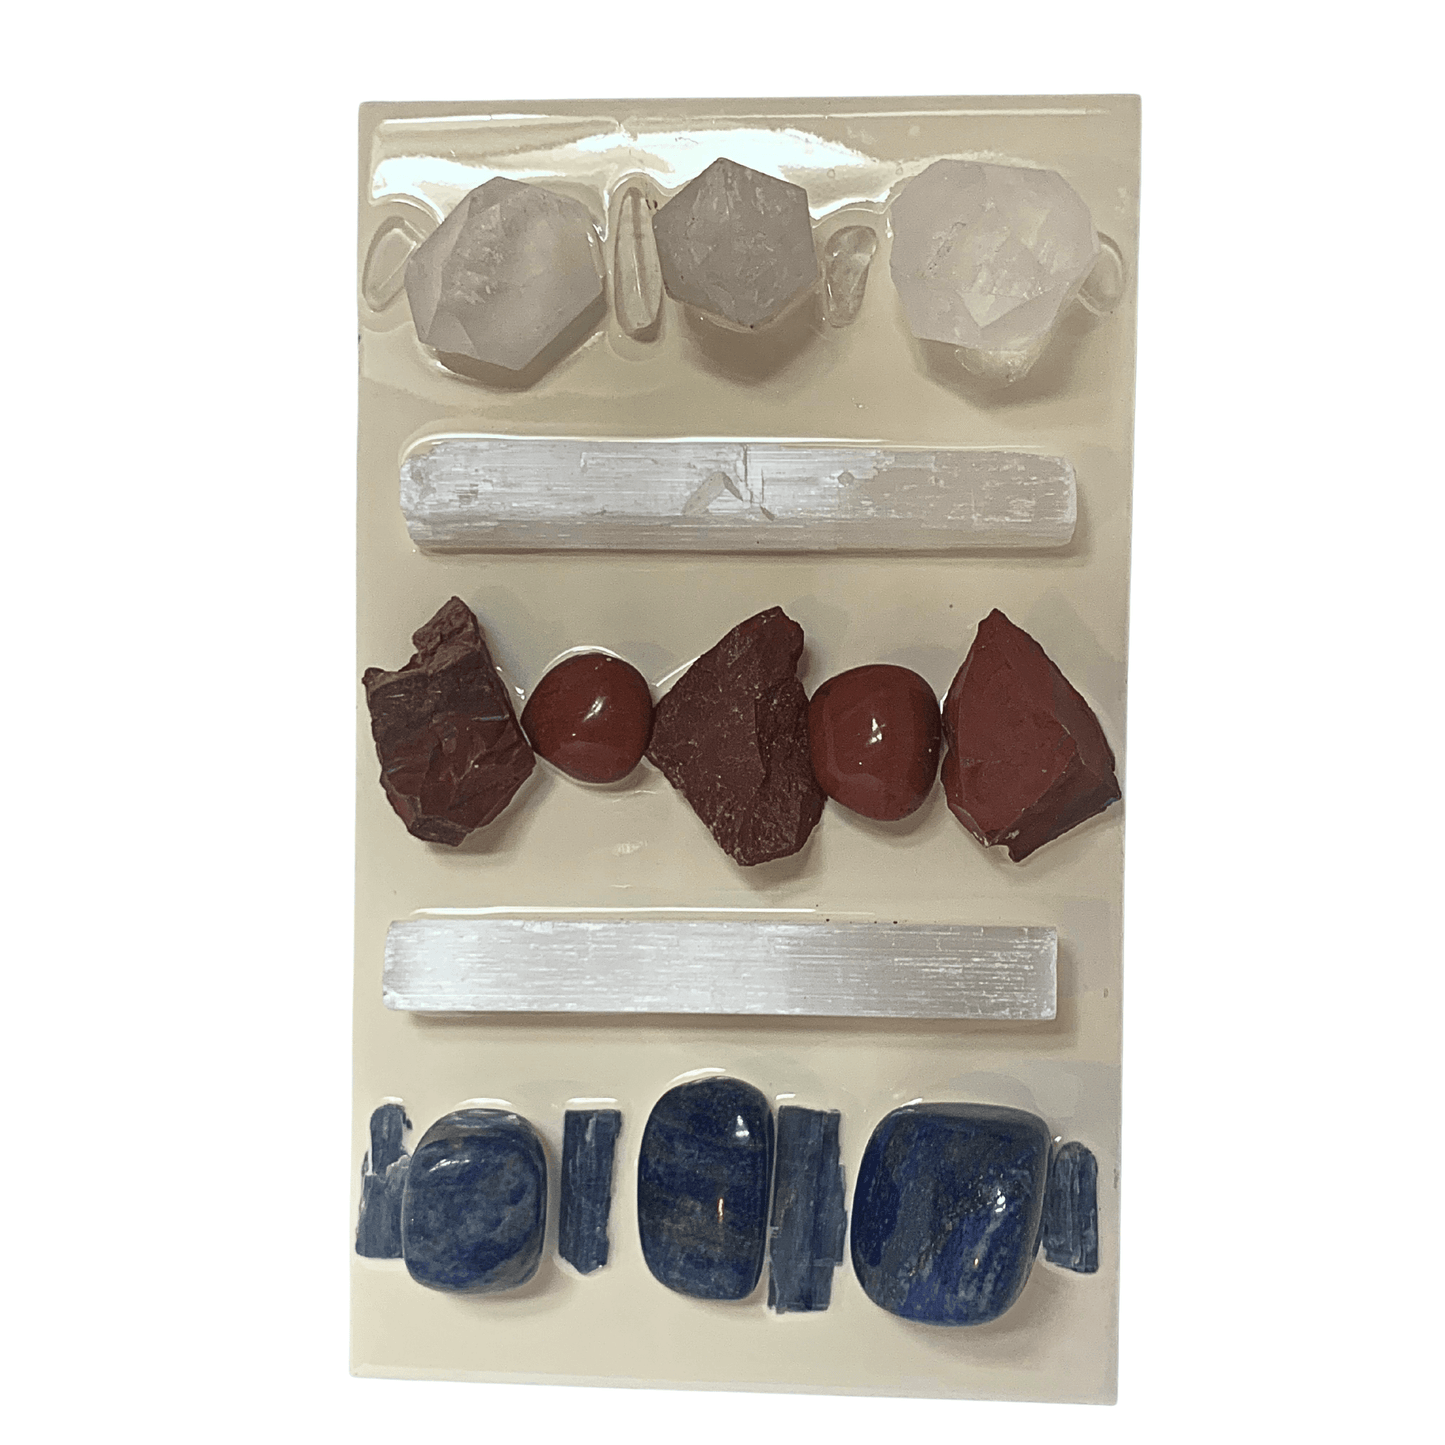 Proud to be An American Crystal Art with Red Jasper, Crystal Quartz, Selenite, and Lapiz Lazuli & Kyanite Crystals